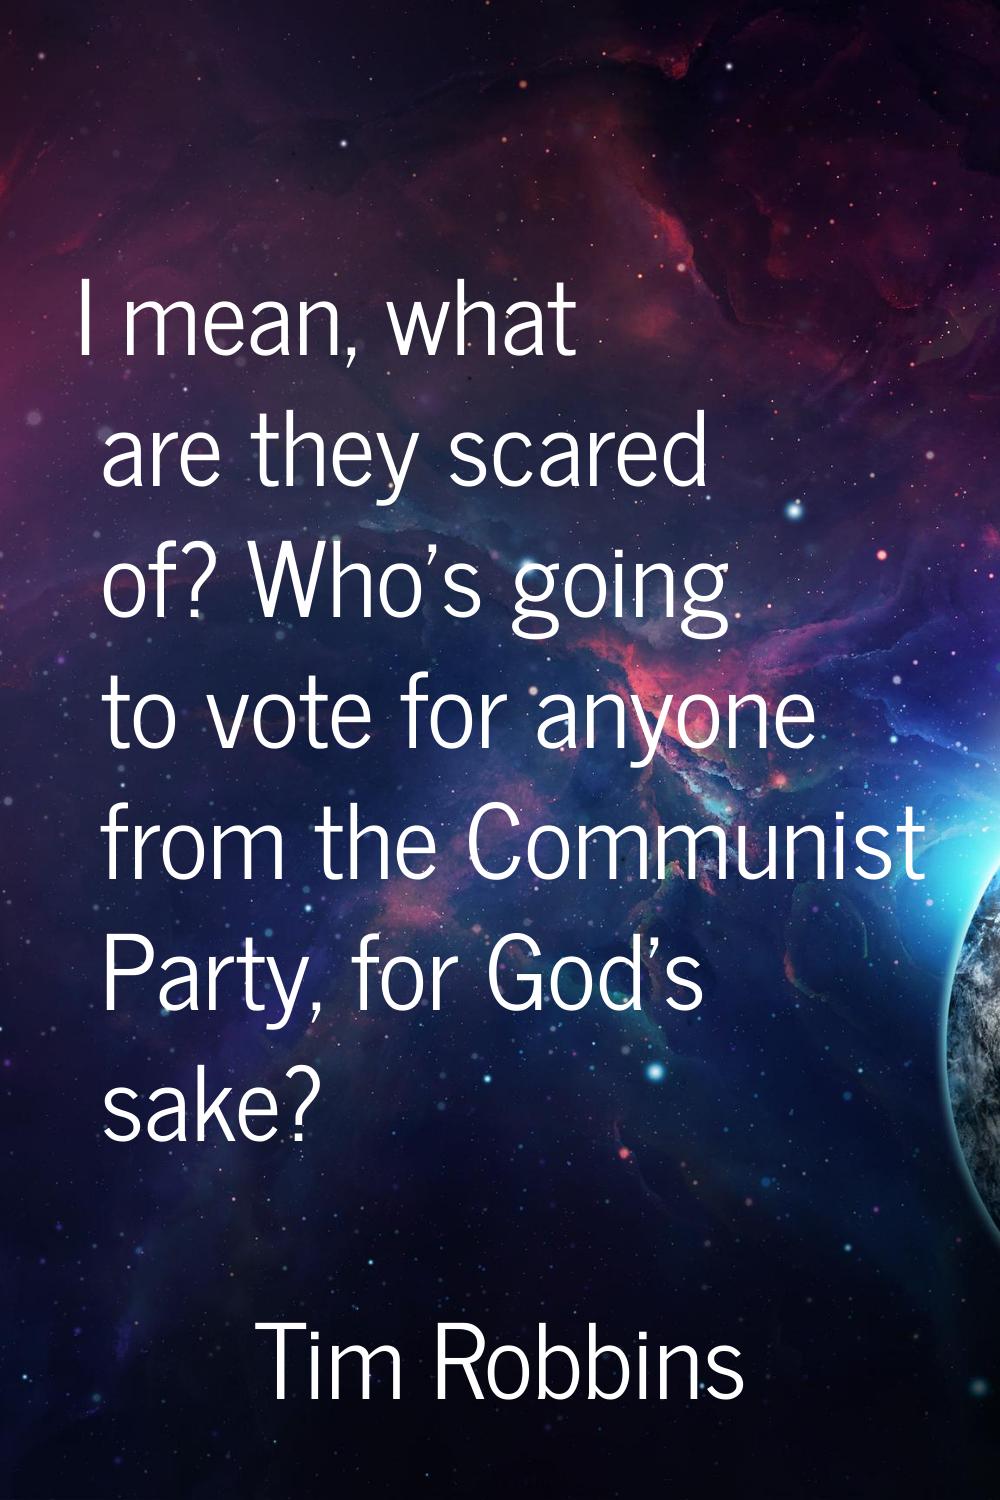 I mean, what are they scared of? Who's going to vote for anyone from the Communist Party, for God's